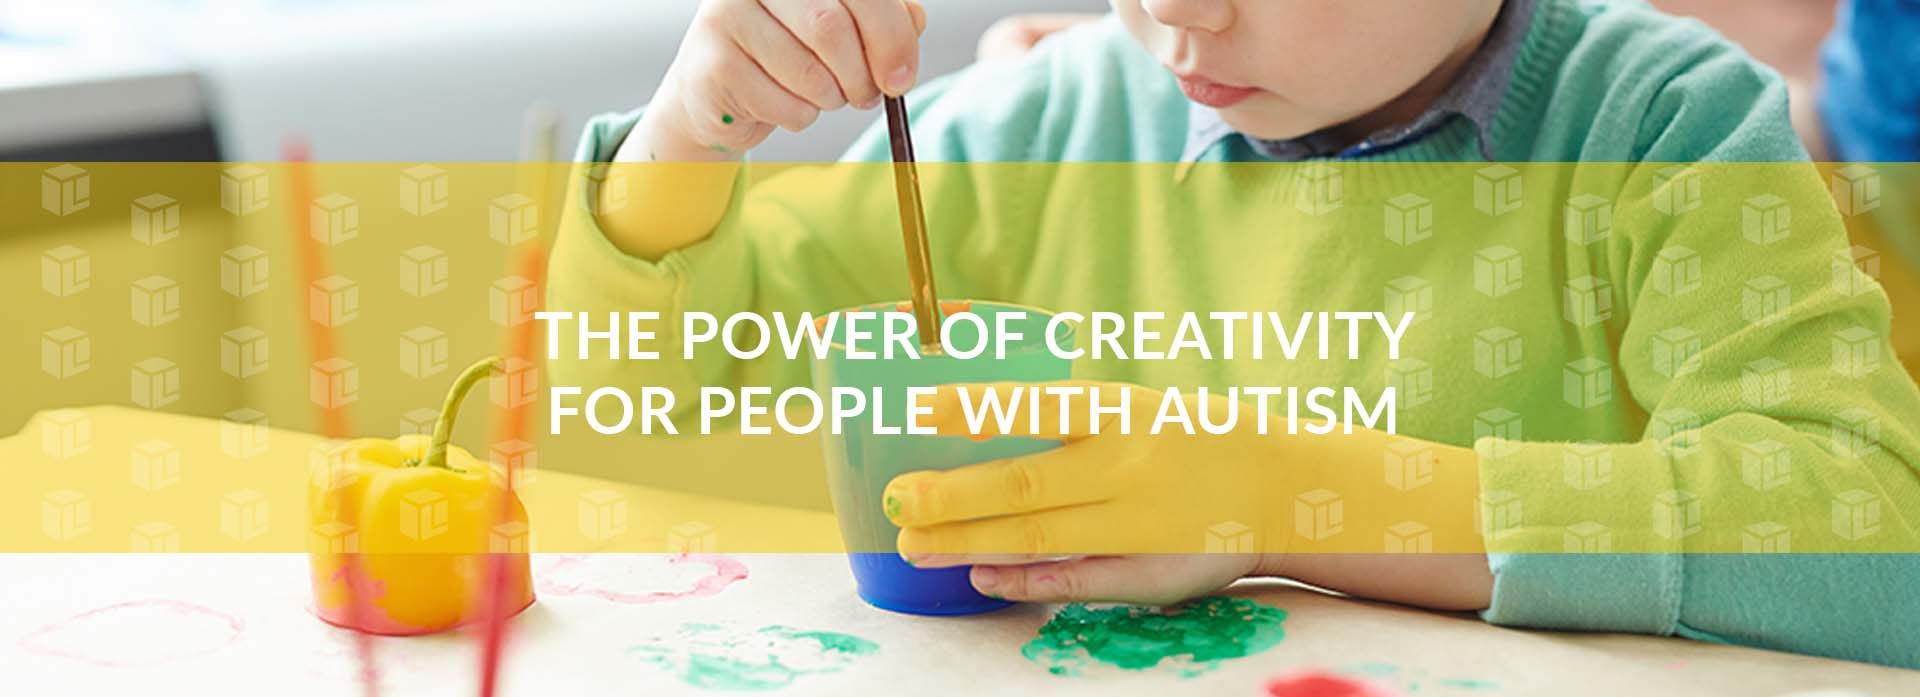 The Power Of Creativity For People With Autism The Power Of Creativity For People With Autism The Power Of Creativity For People With Autism The Power Of Creativity For People With Autism